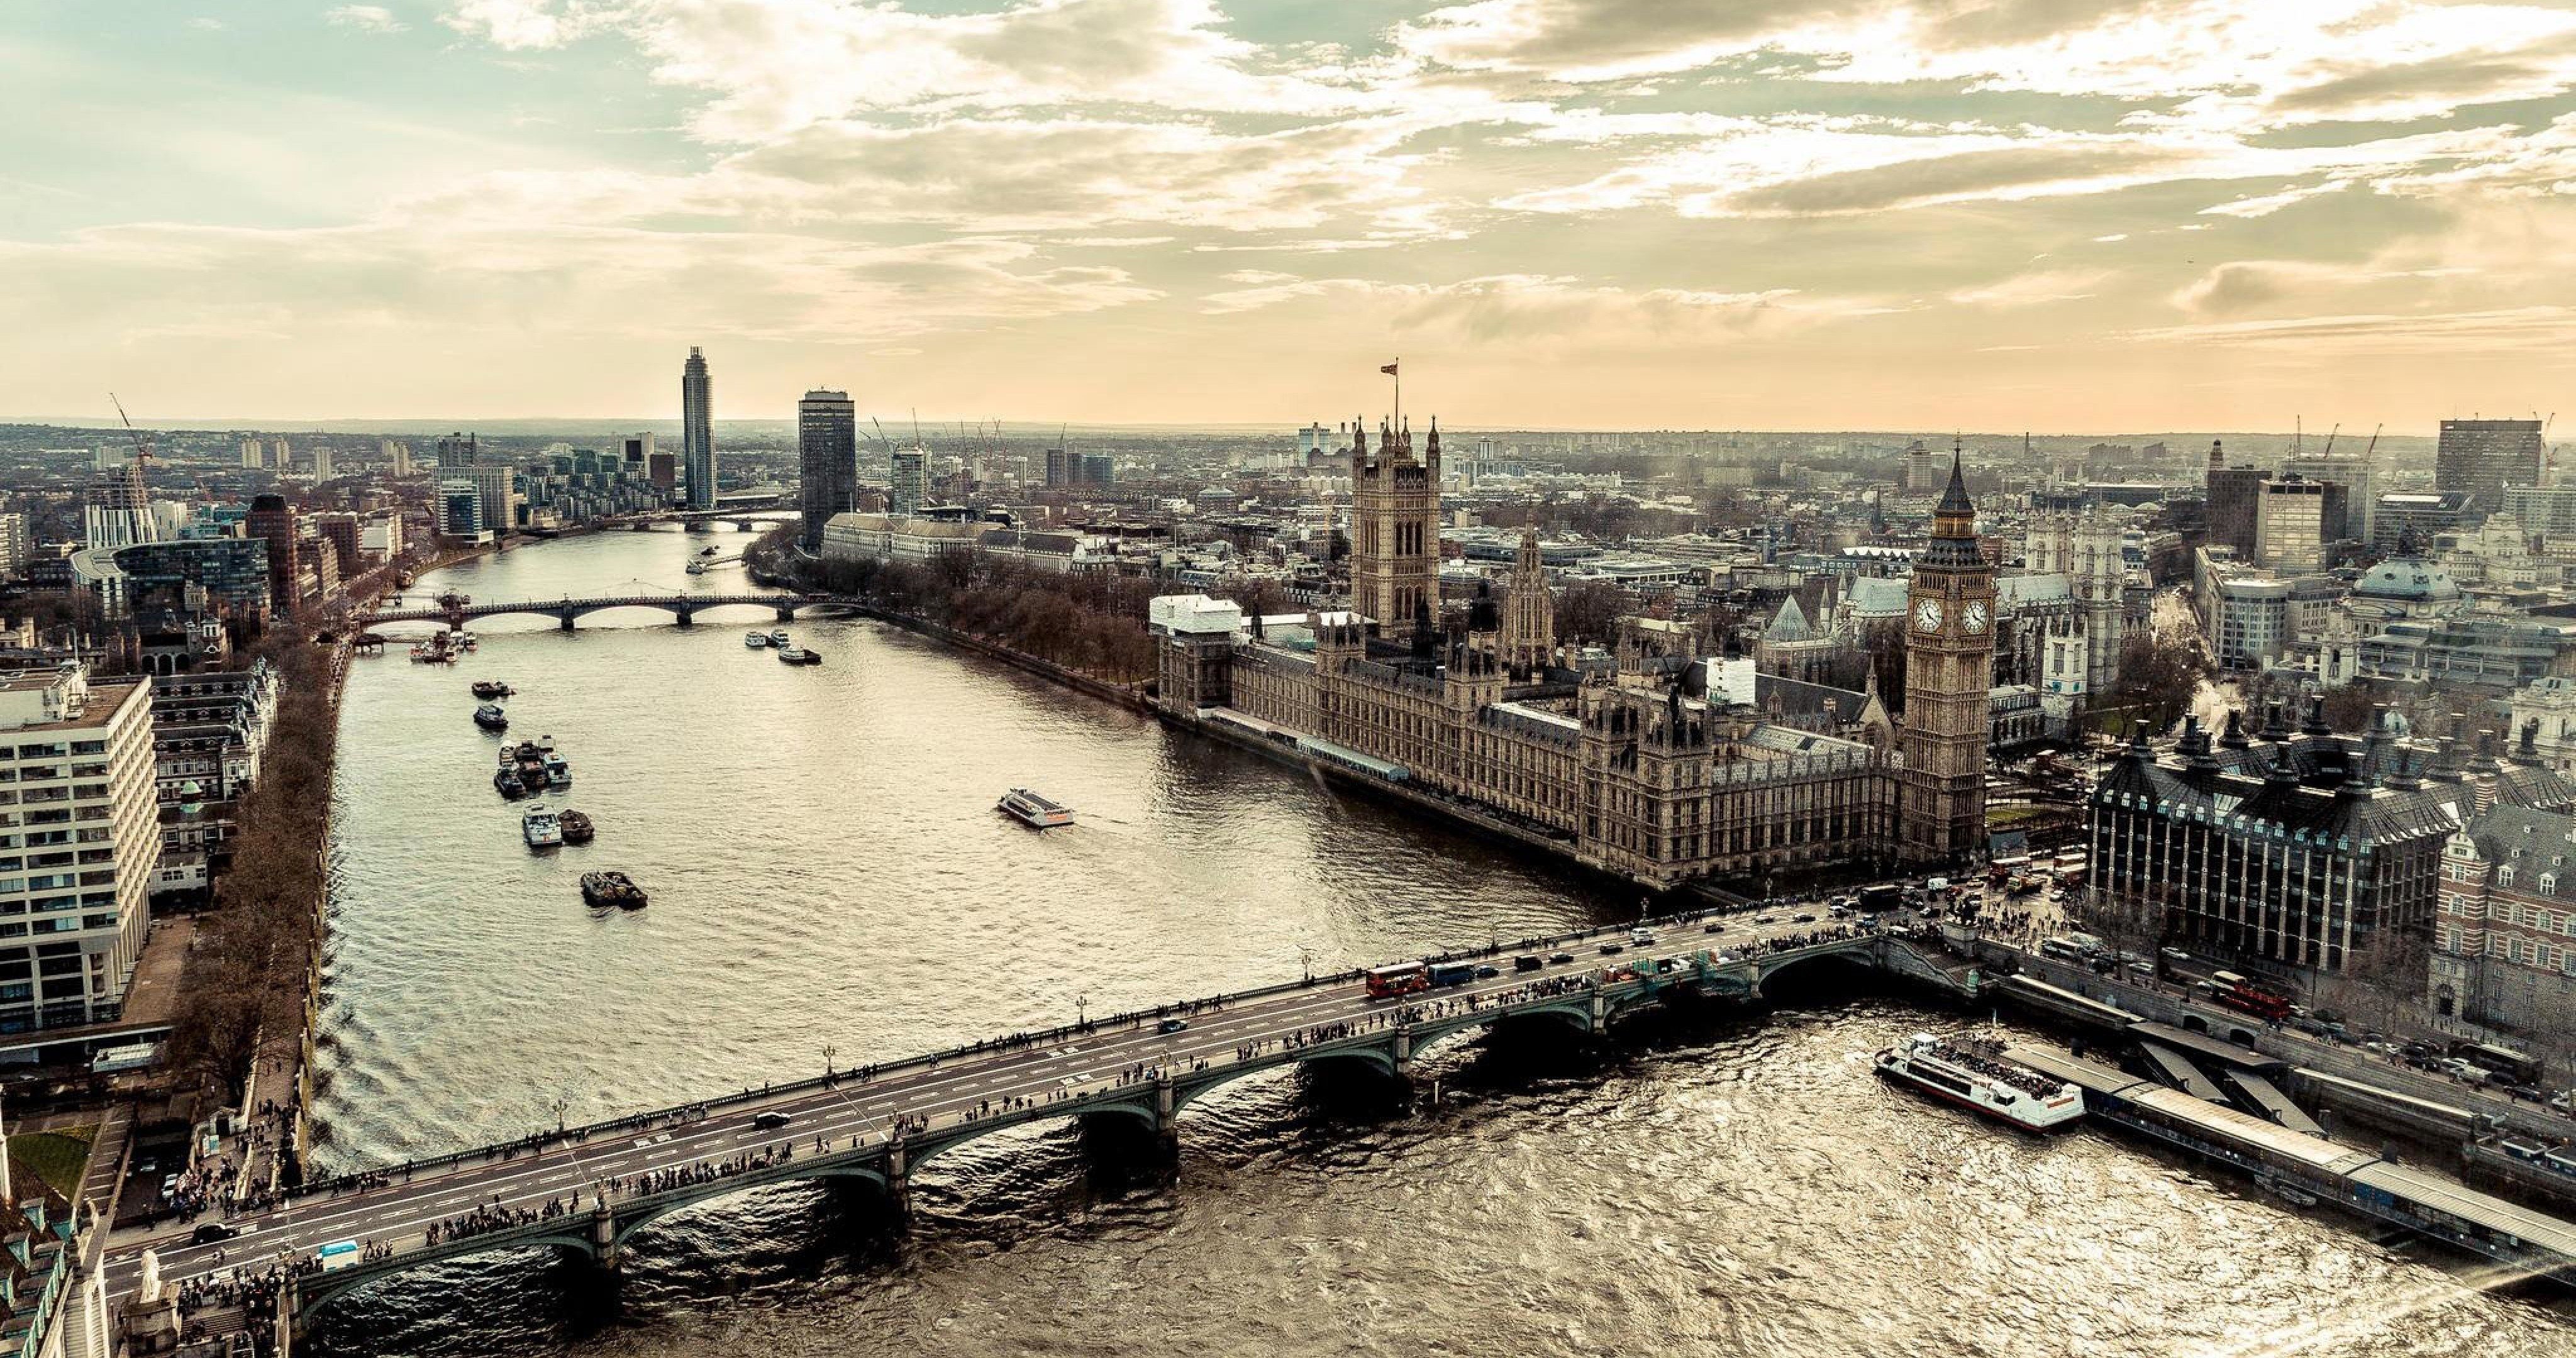 london view from above 4k ultra HD wallpaper High quality walls